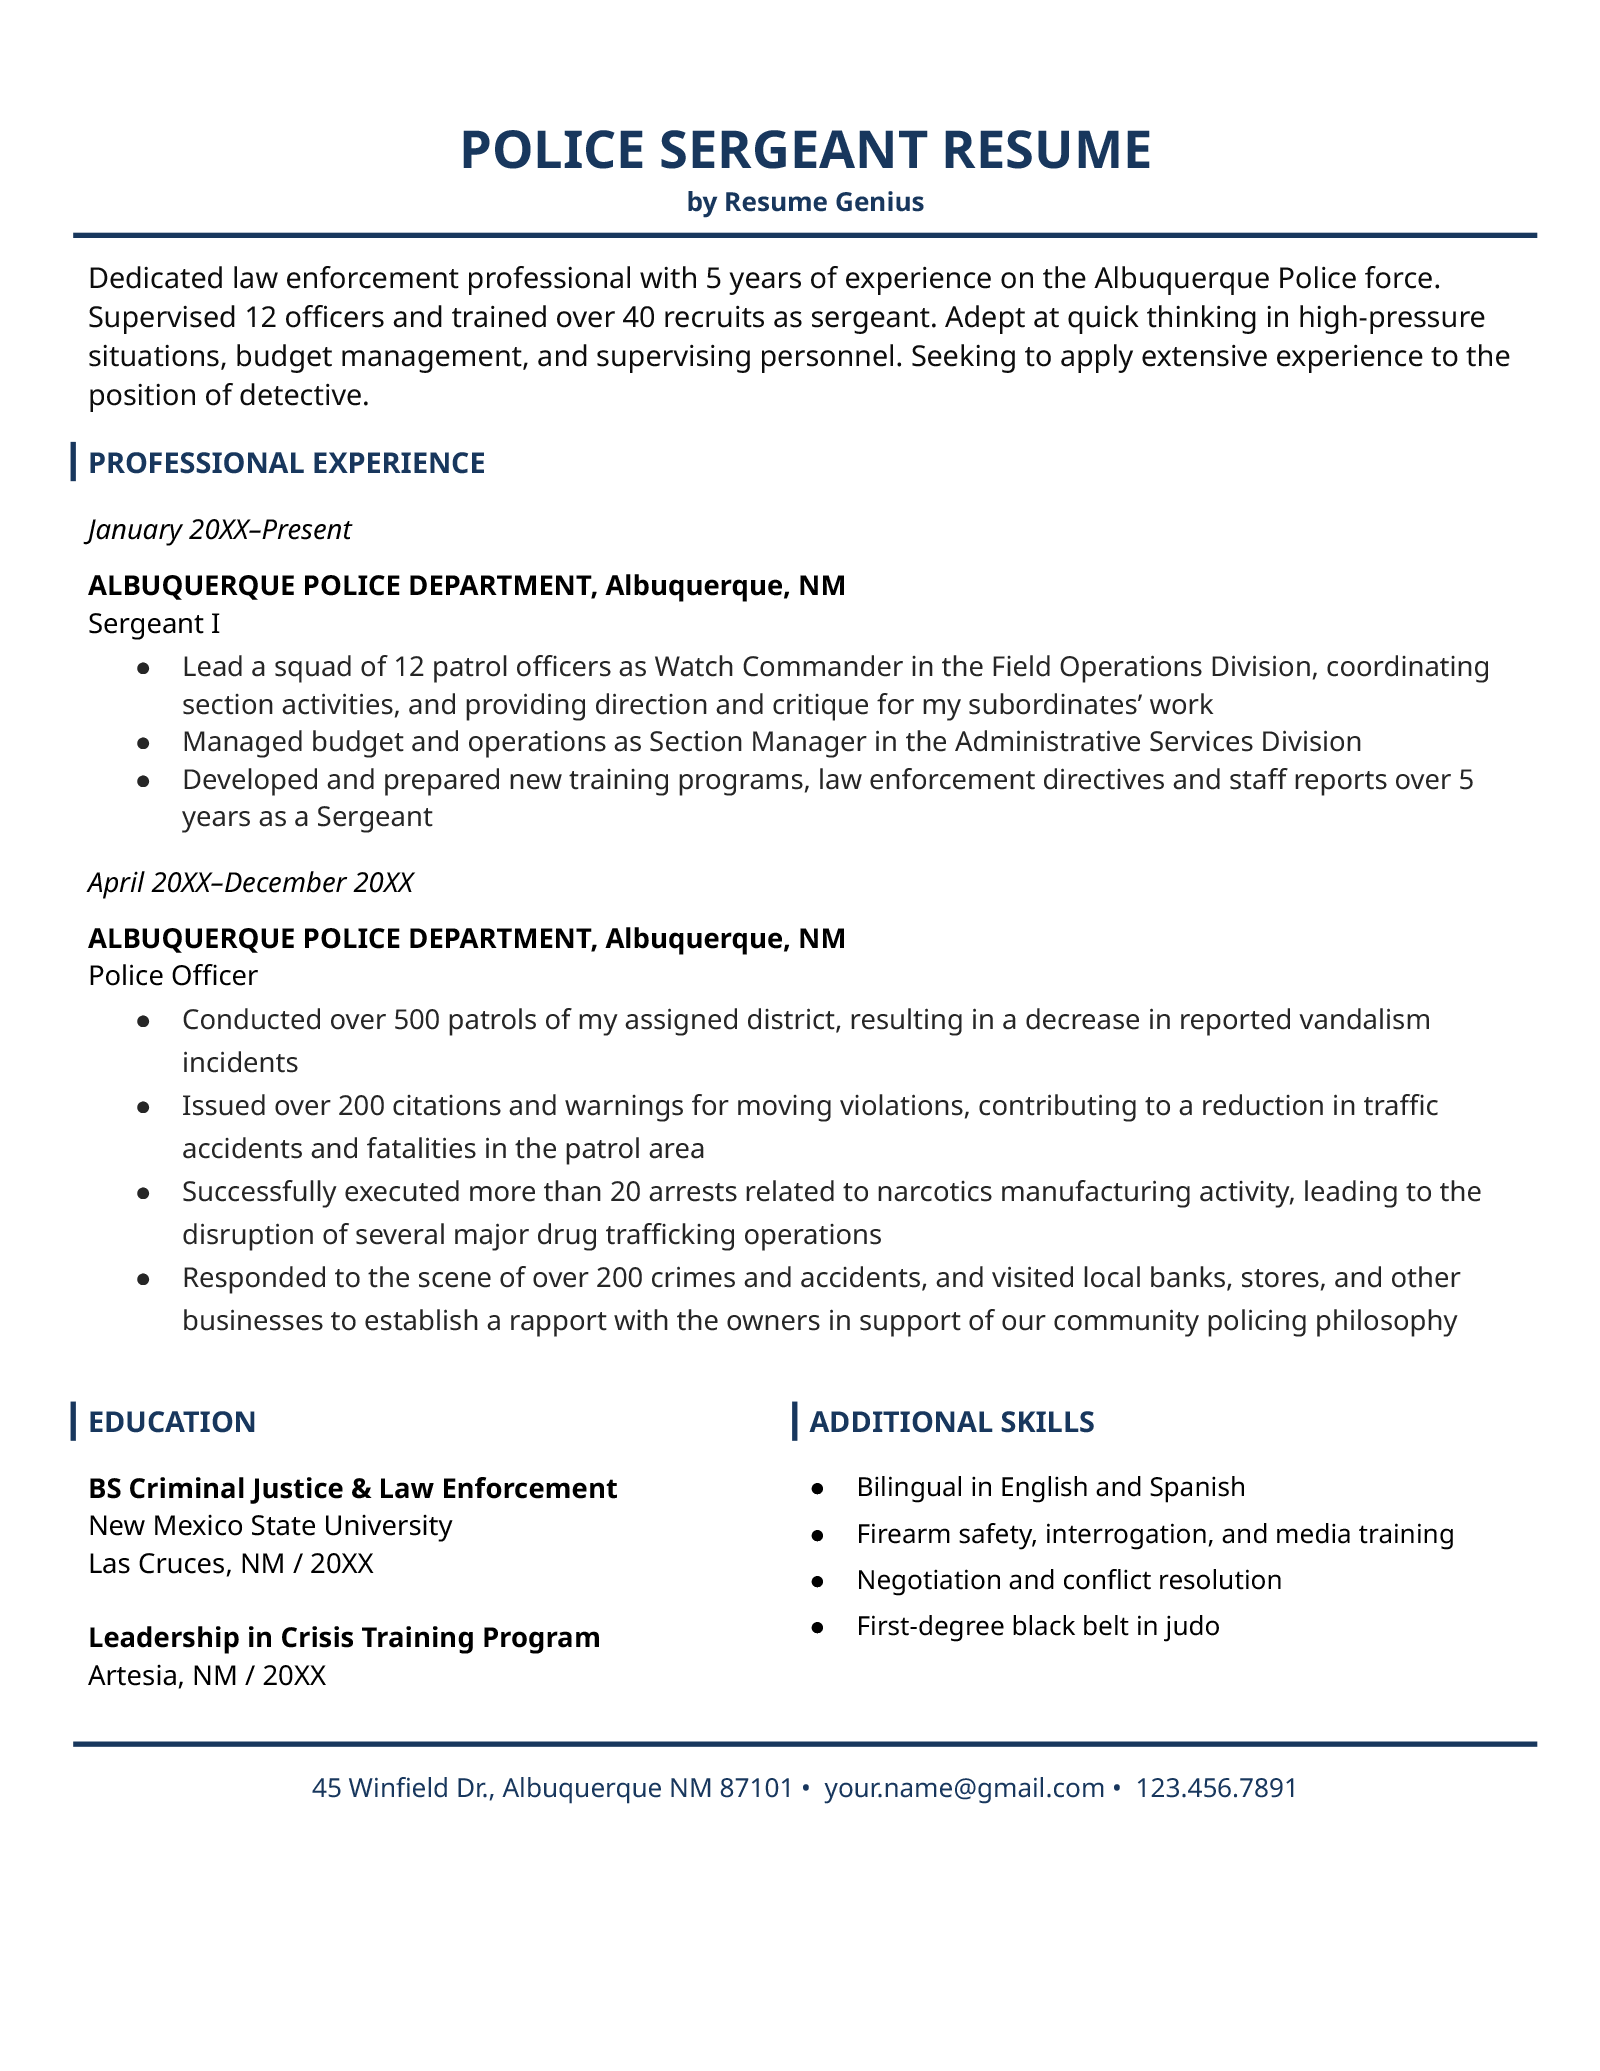 an example of a police sergeant resume